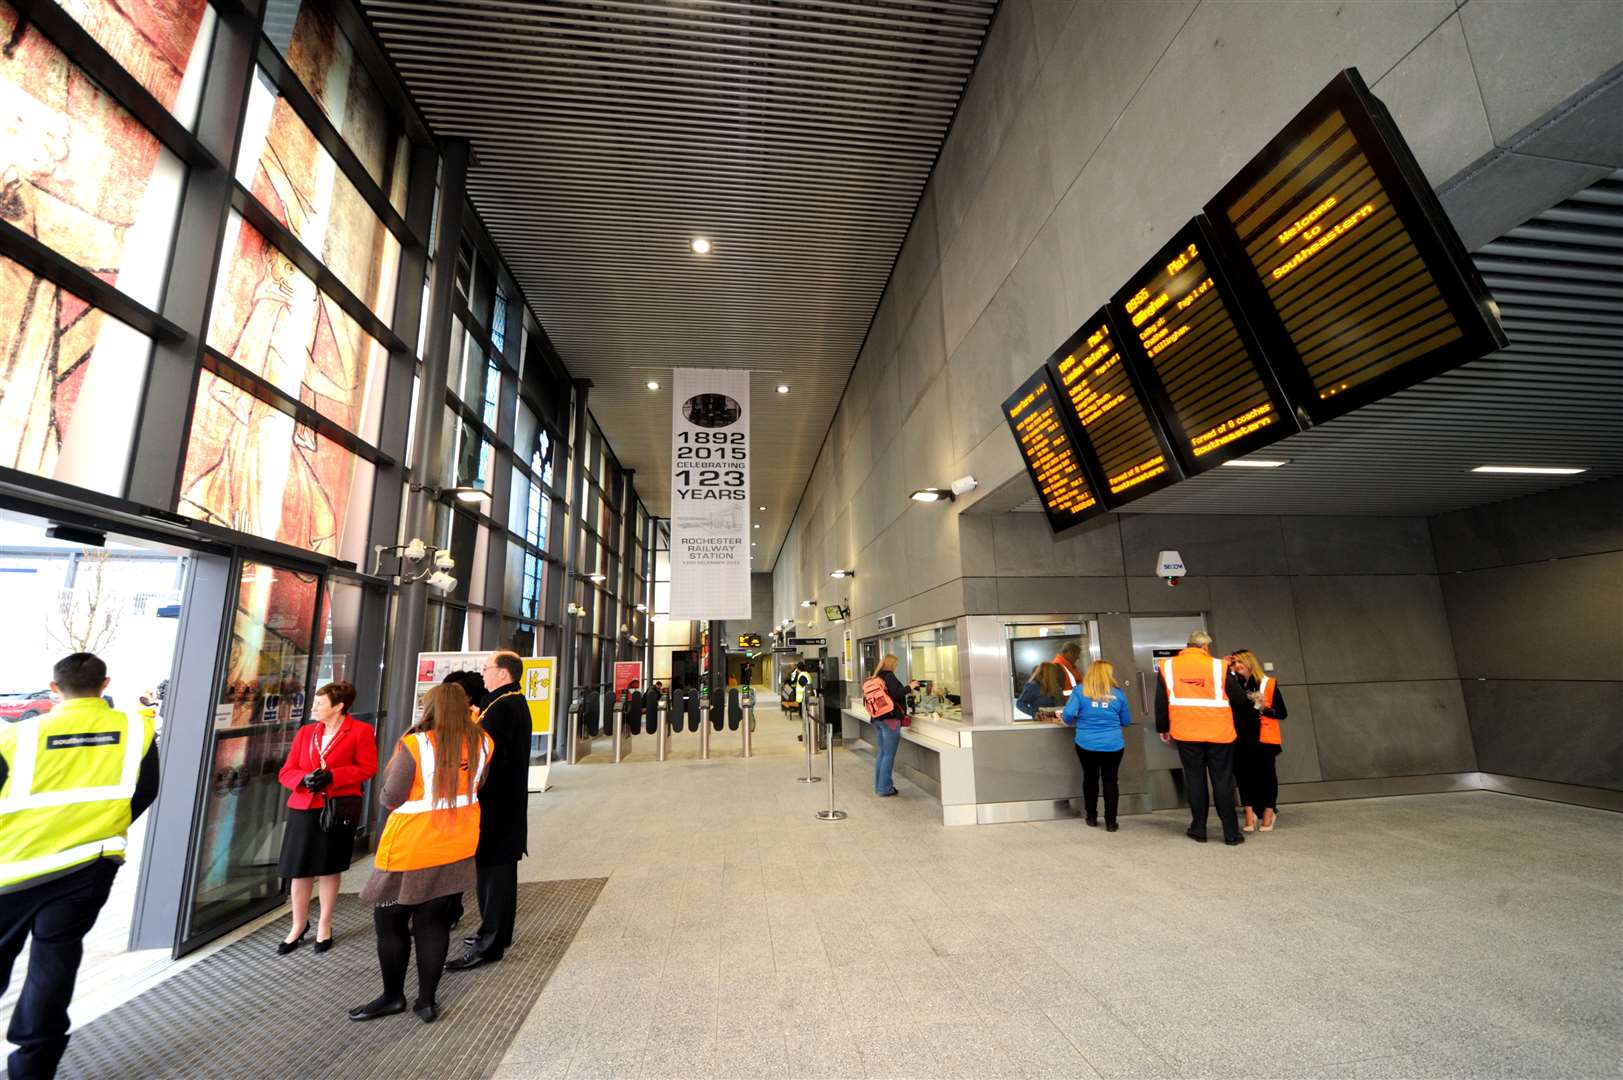 Rochester station cost £26m